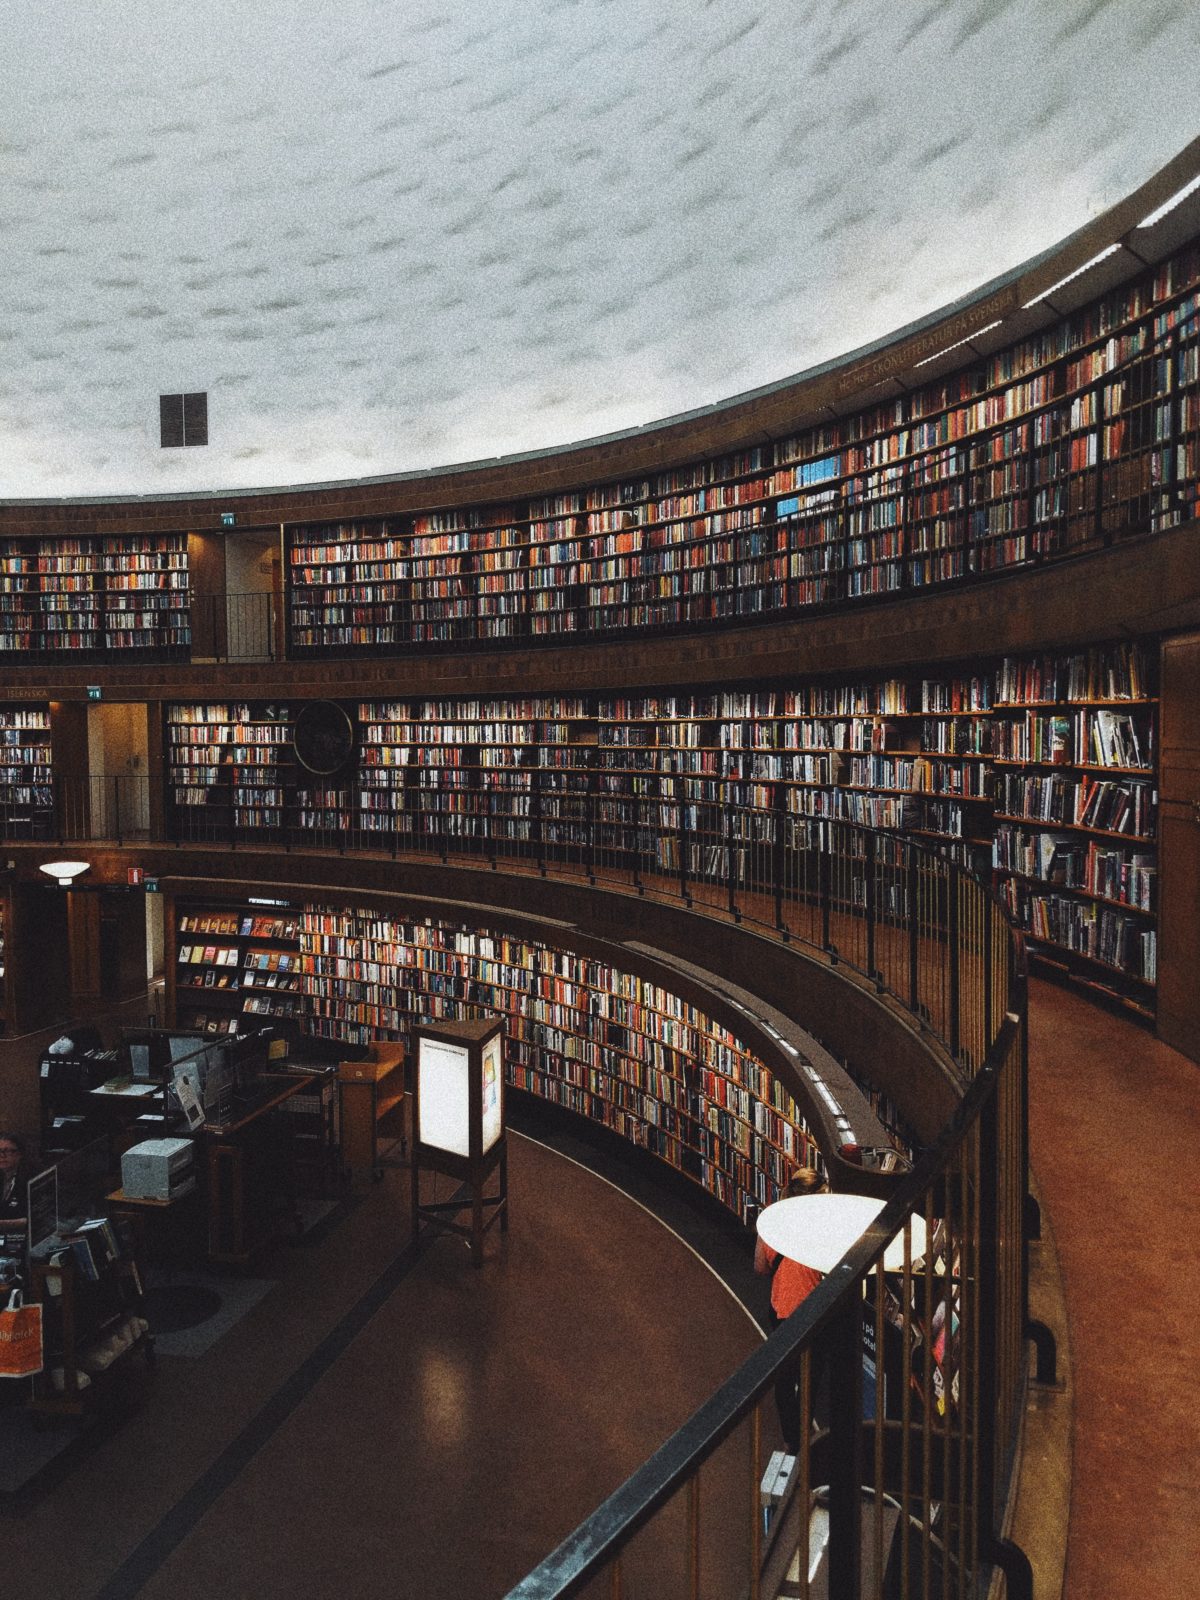 Books in a library